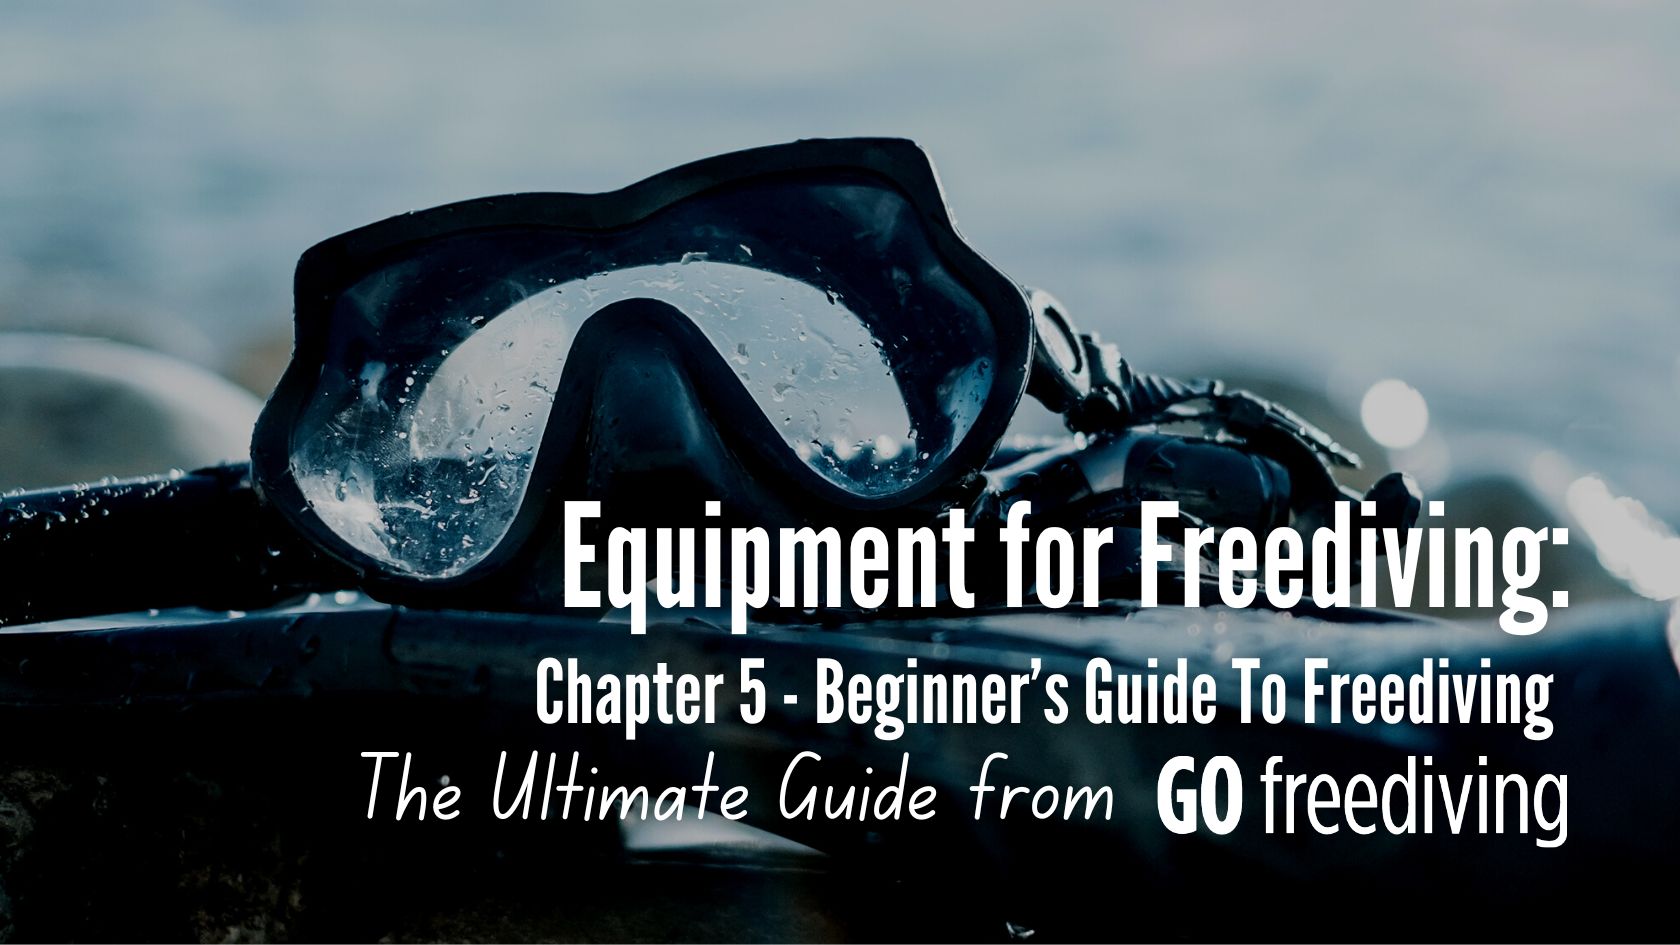 4 quick tips on how to take care of your scuba diving gear - Dolphin Scuba